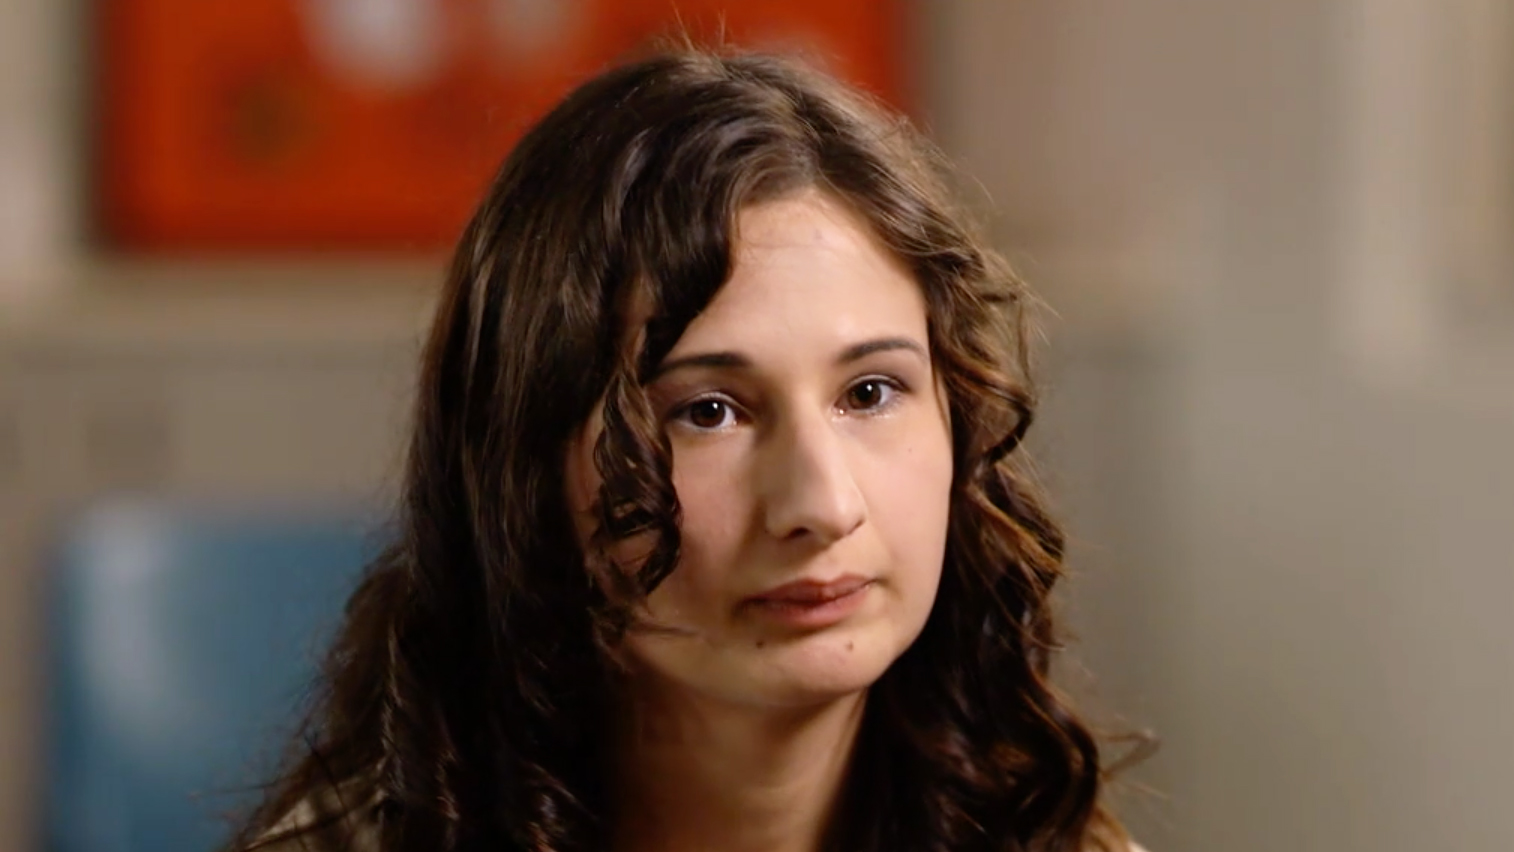 Gypsy Rose Blanchard Now: See Photos of Her Today